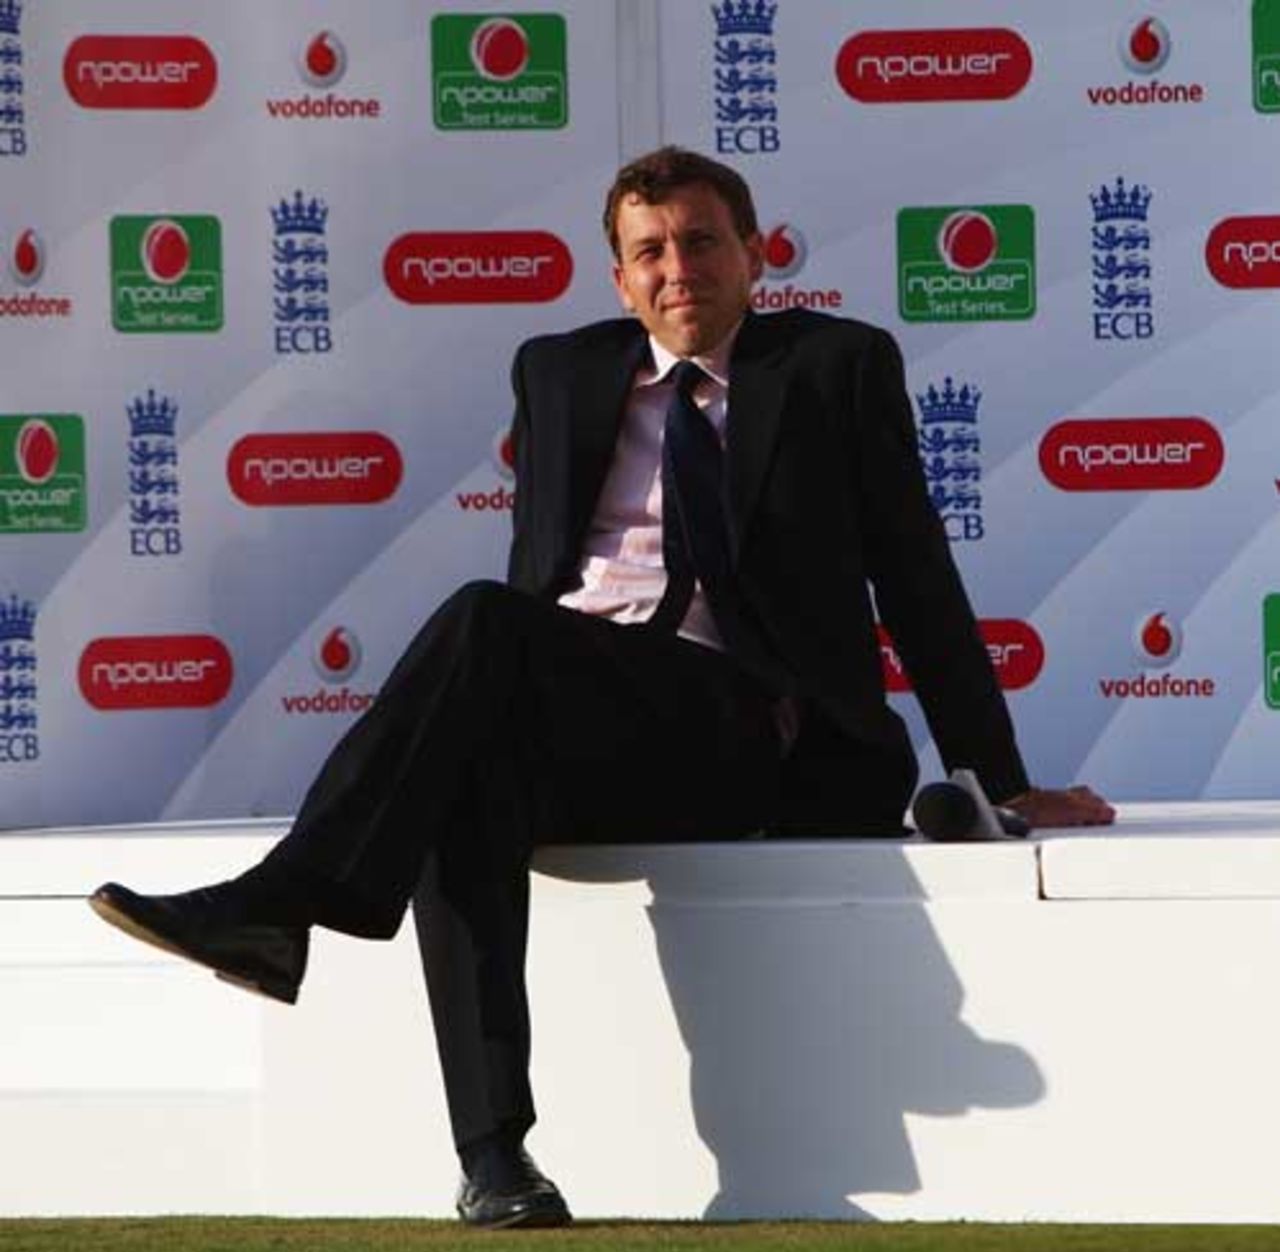 Commentator Michael Atherton sits on the npower stage on day five, England v India, third Test, The Oval